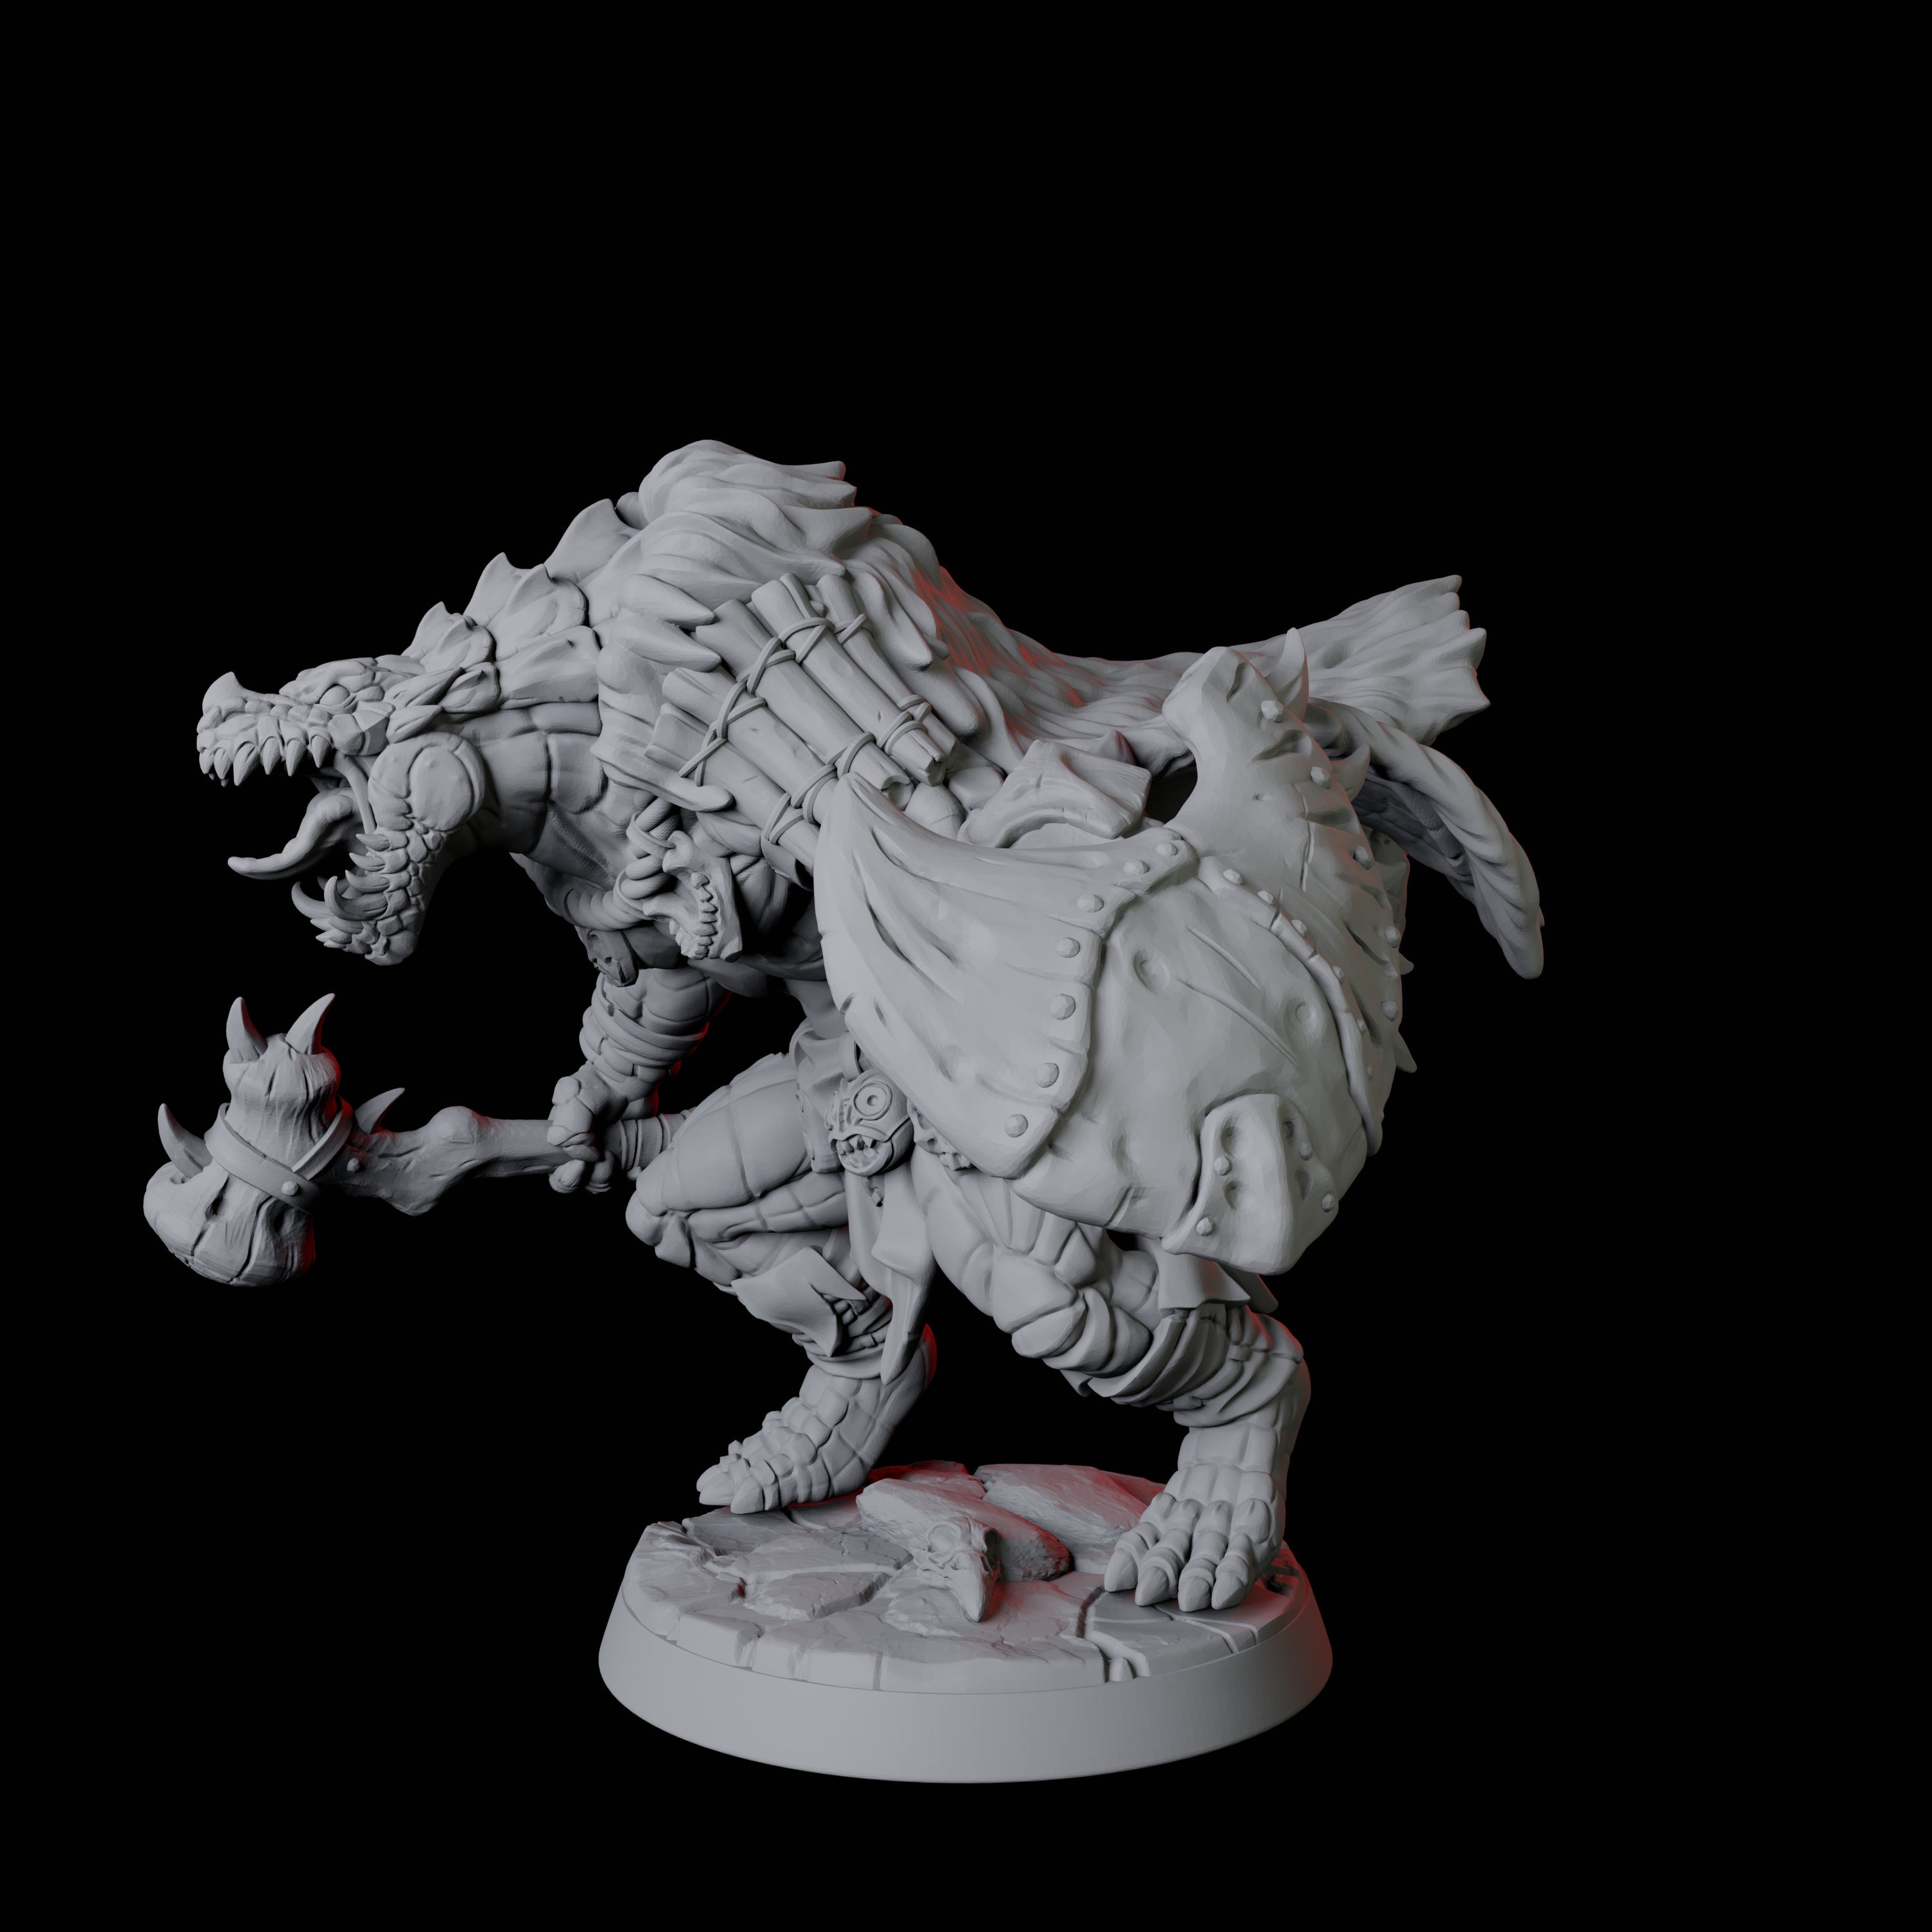 Powerful Frost Lizardfolk B Miniature for Dungeons and Dragons, Pathfinder or other TTRPGs